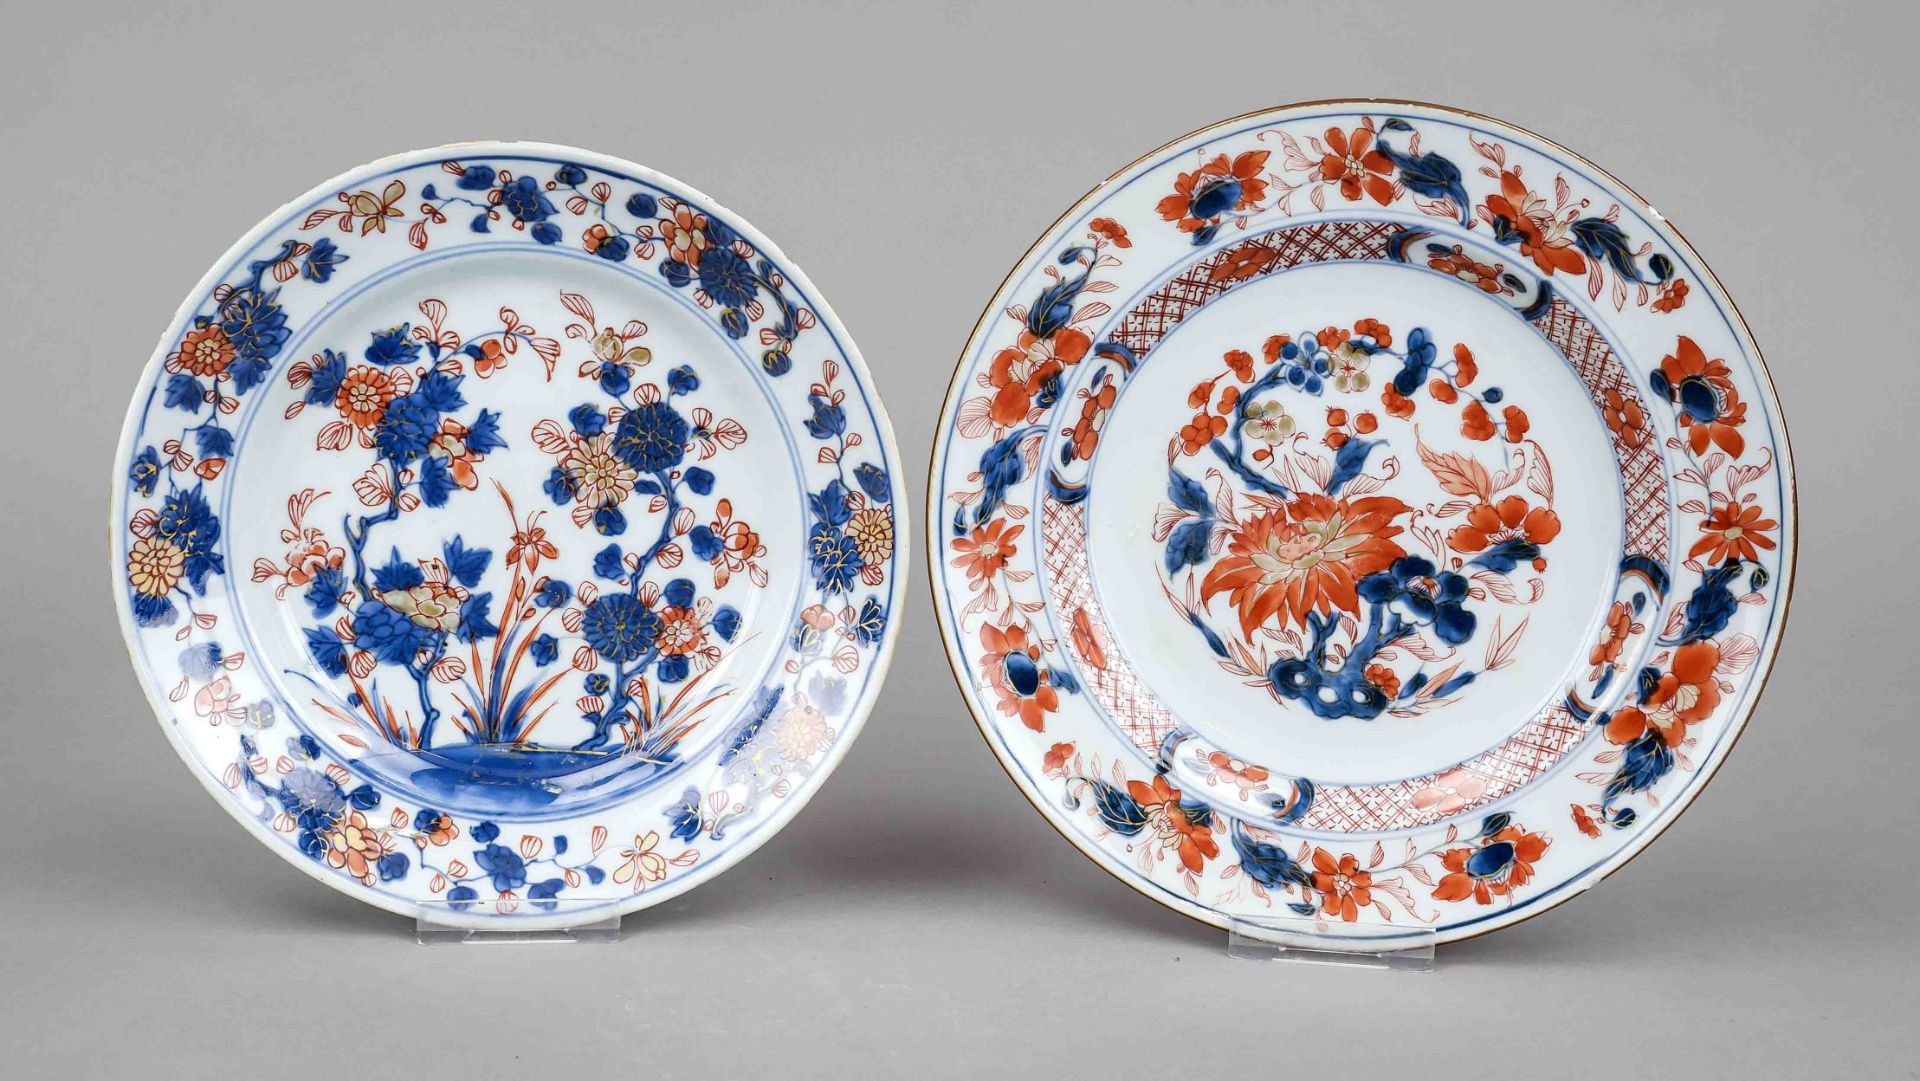 Two export Imari plates, China 18th century, both with floral decoration in cobalt blue, iron red